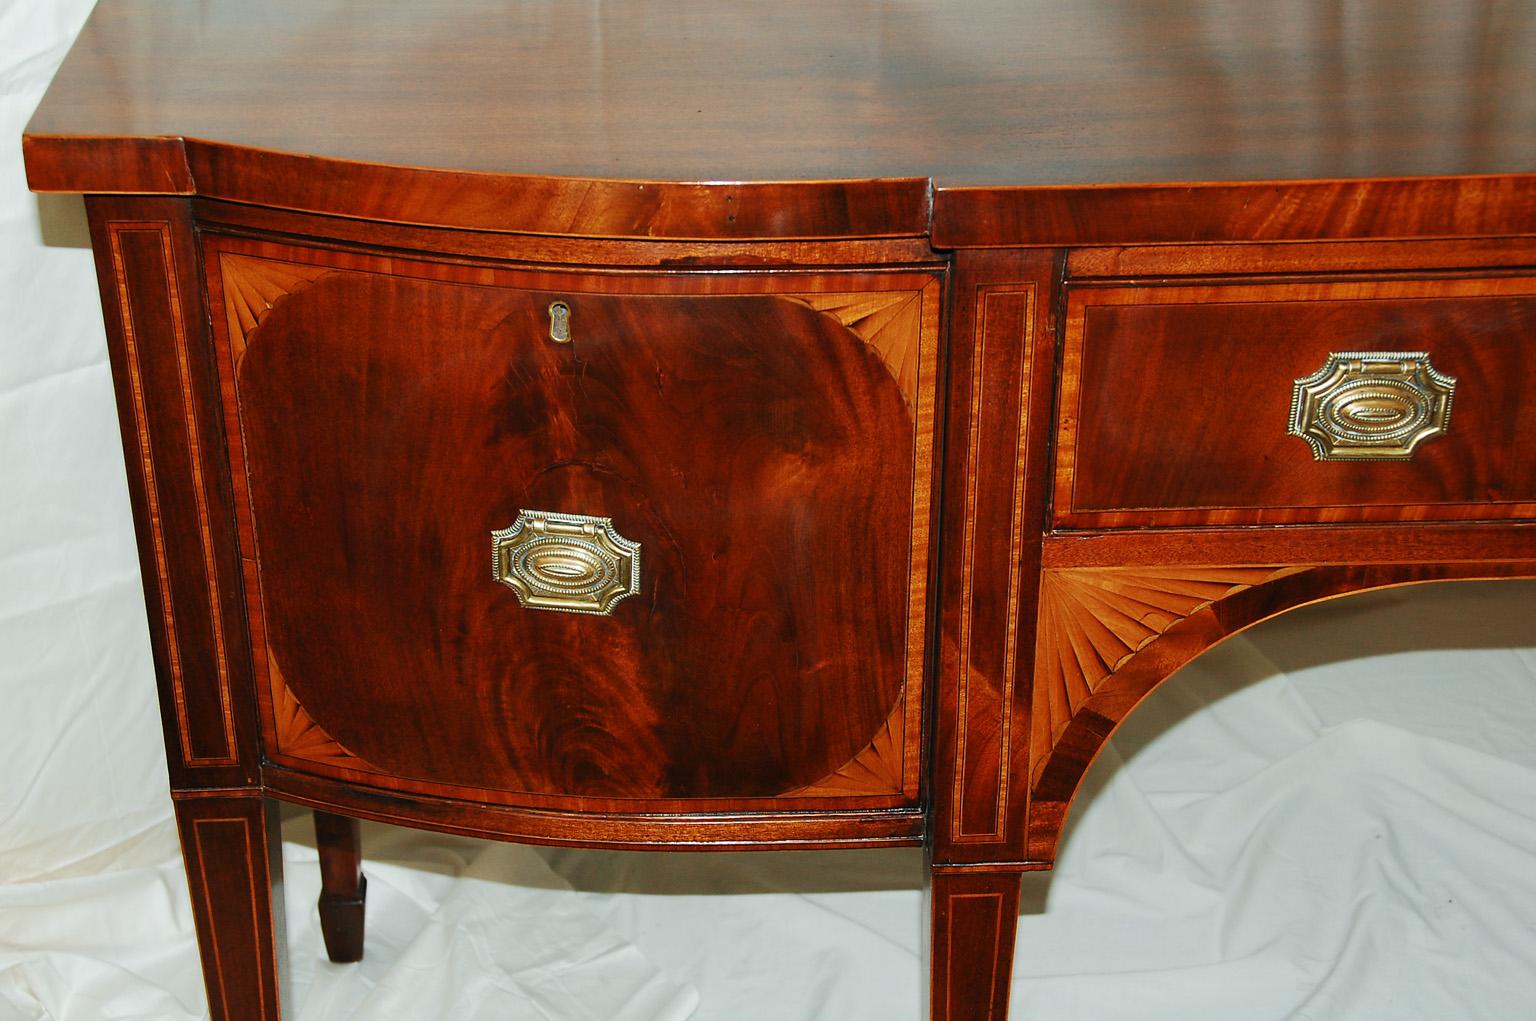 English Hepplewhite breakfront bowfront mahogany inlaid sideboard with inlaid tapered legs ending in Marlborough feet. This 70 inch long sideboard has wonderful timber and classic inlay. The fan inlay made of shaded boxwood frames the arch under the